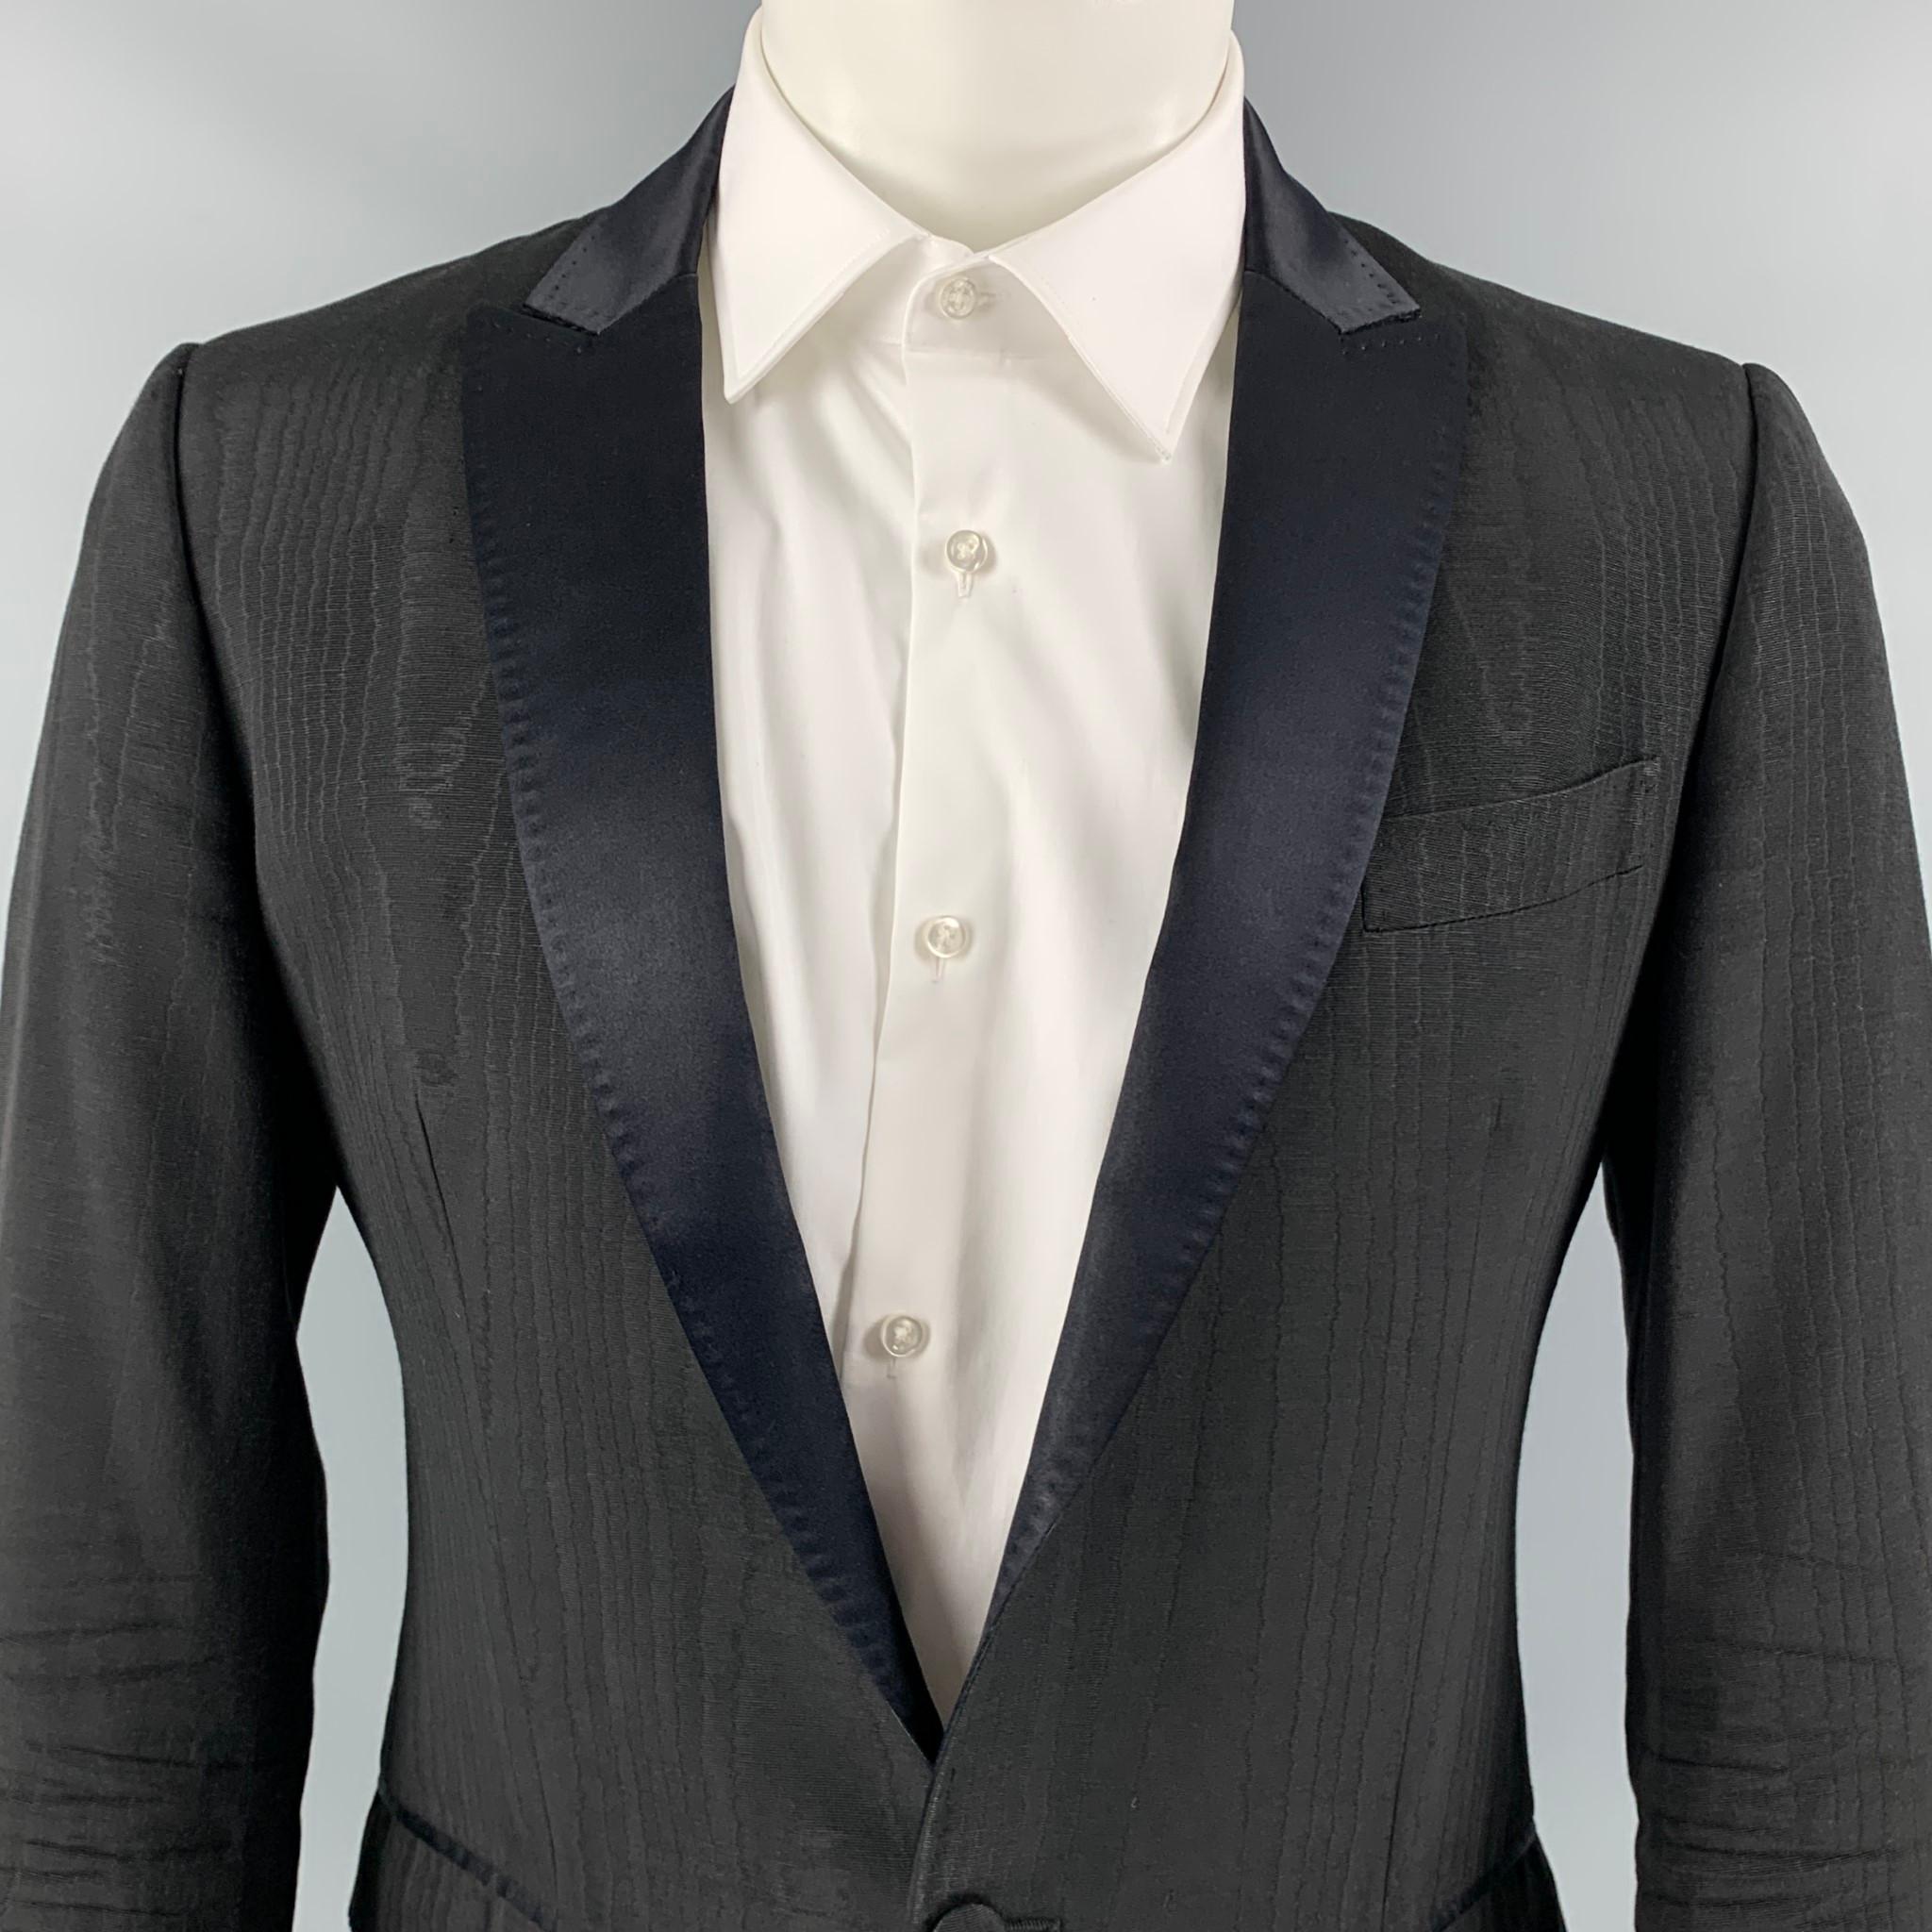 D&G by DOLCE & GABBANA sport coat comes in a black jacquard acetate blend with a full liner featuring a peak lapel, flap pockets, and a single button closure. Made in Italy. 

Very Good Pre-Owned Condition.
Marked: 46

Measurements:

Shoulder: 17